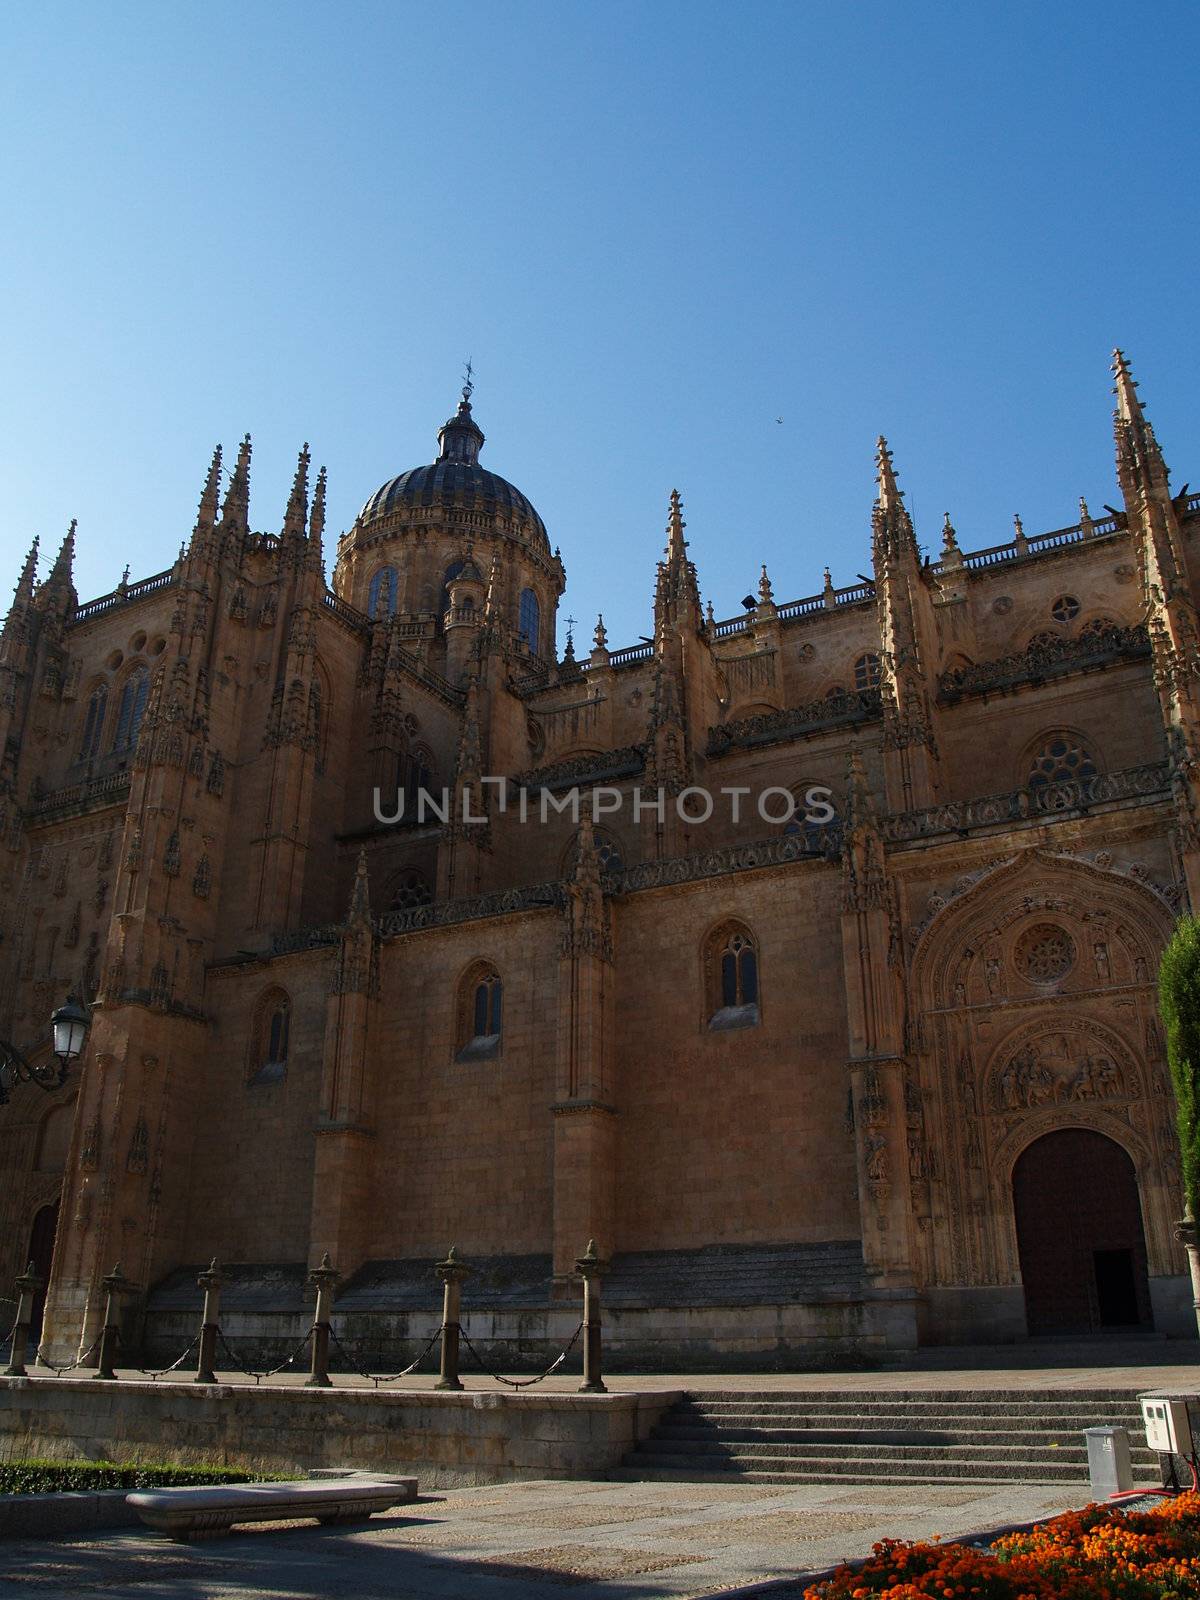 The new cathedral in Salamanca, Spain